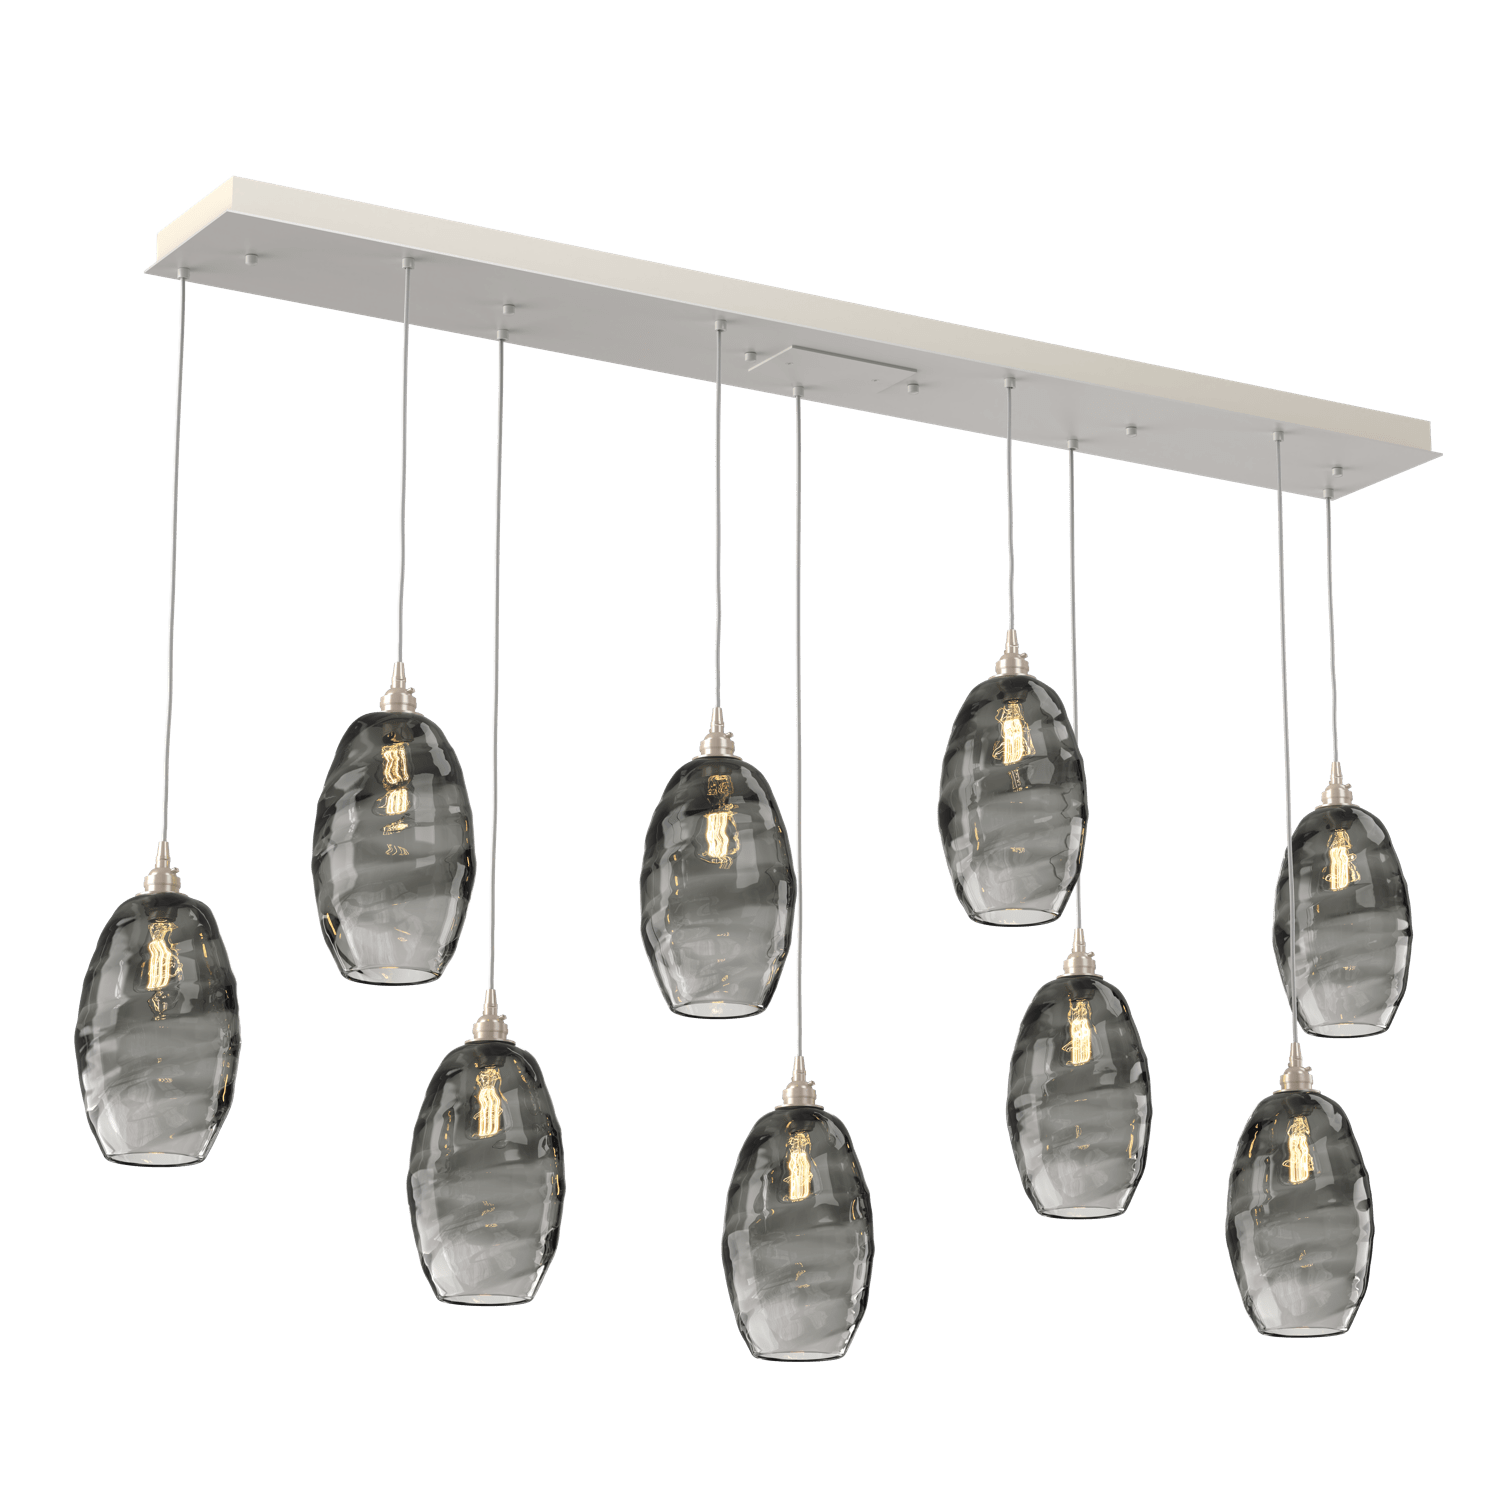 PLB0035-09-BS-OS-Hammerton-Studio-Optic-Blown-Glass-Elisse-9-light-linear-pendant-chandelier-with-metallic-beige-silver-finish-and-optic-smoke-blown-glass-shades-and-incandescent-lamping